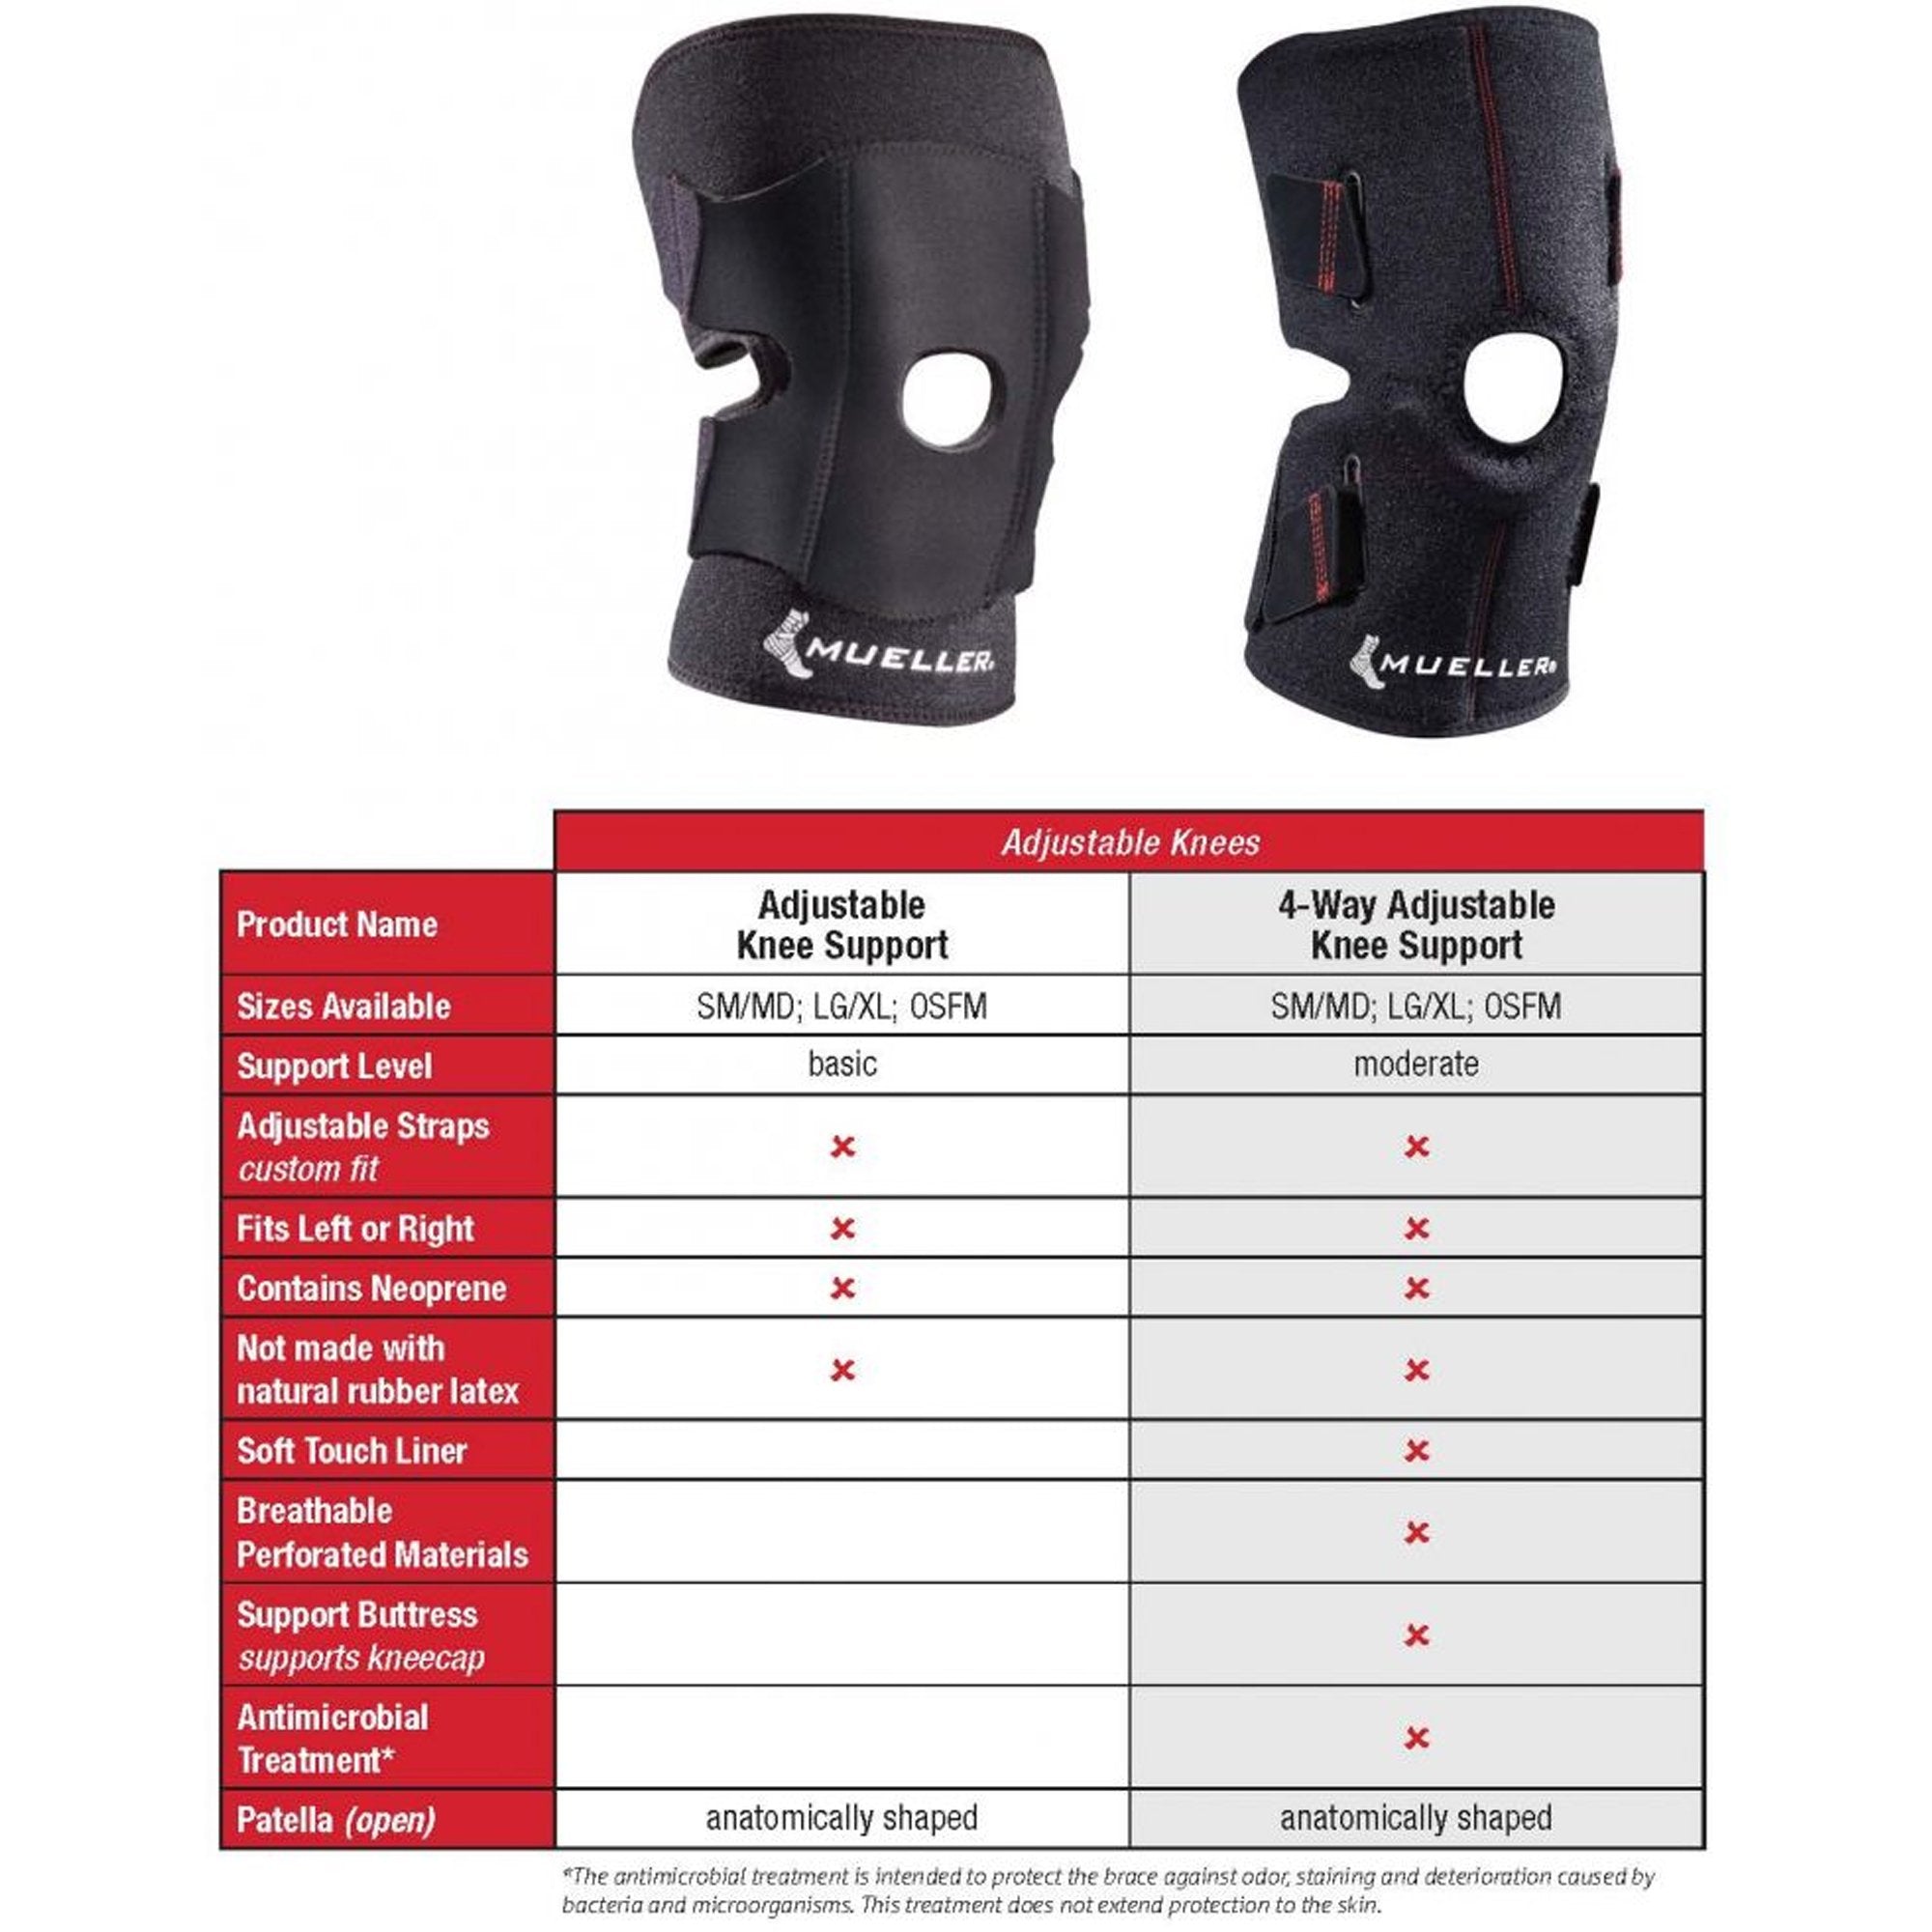 Knee Support One Size Fits Most Pull-On / Hook and Loop Strap Closure 12 to 20 Inch Left or Right Knee